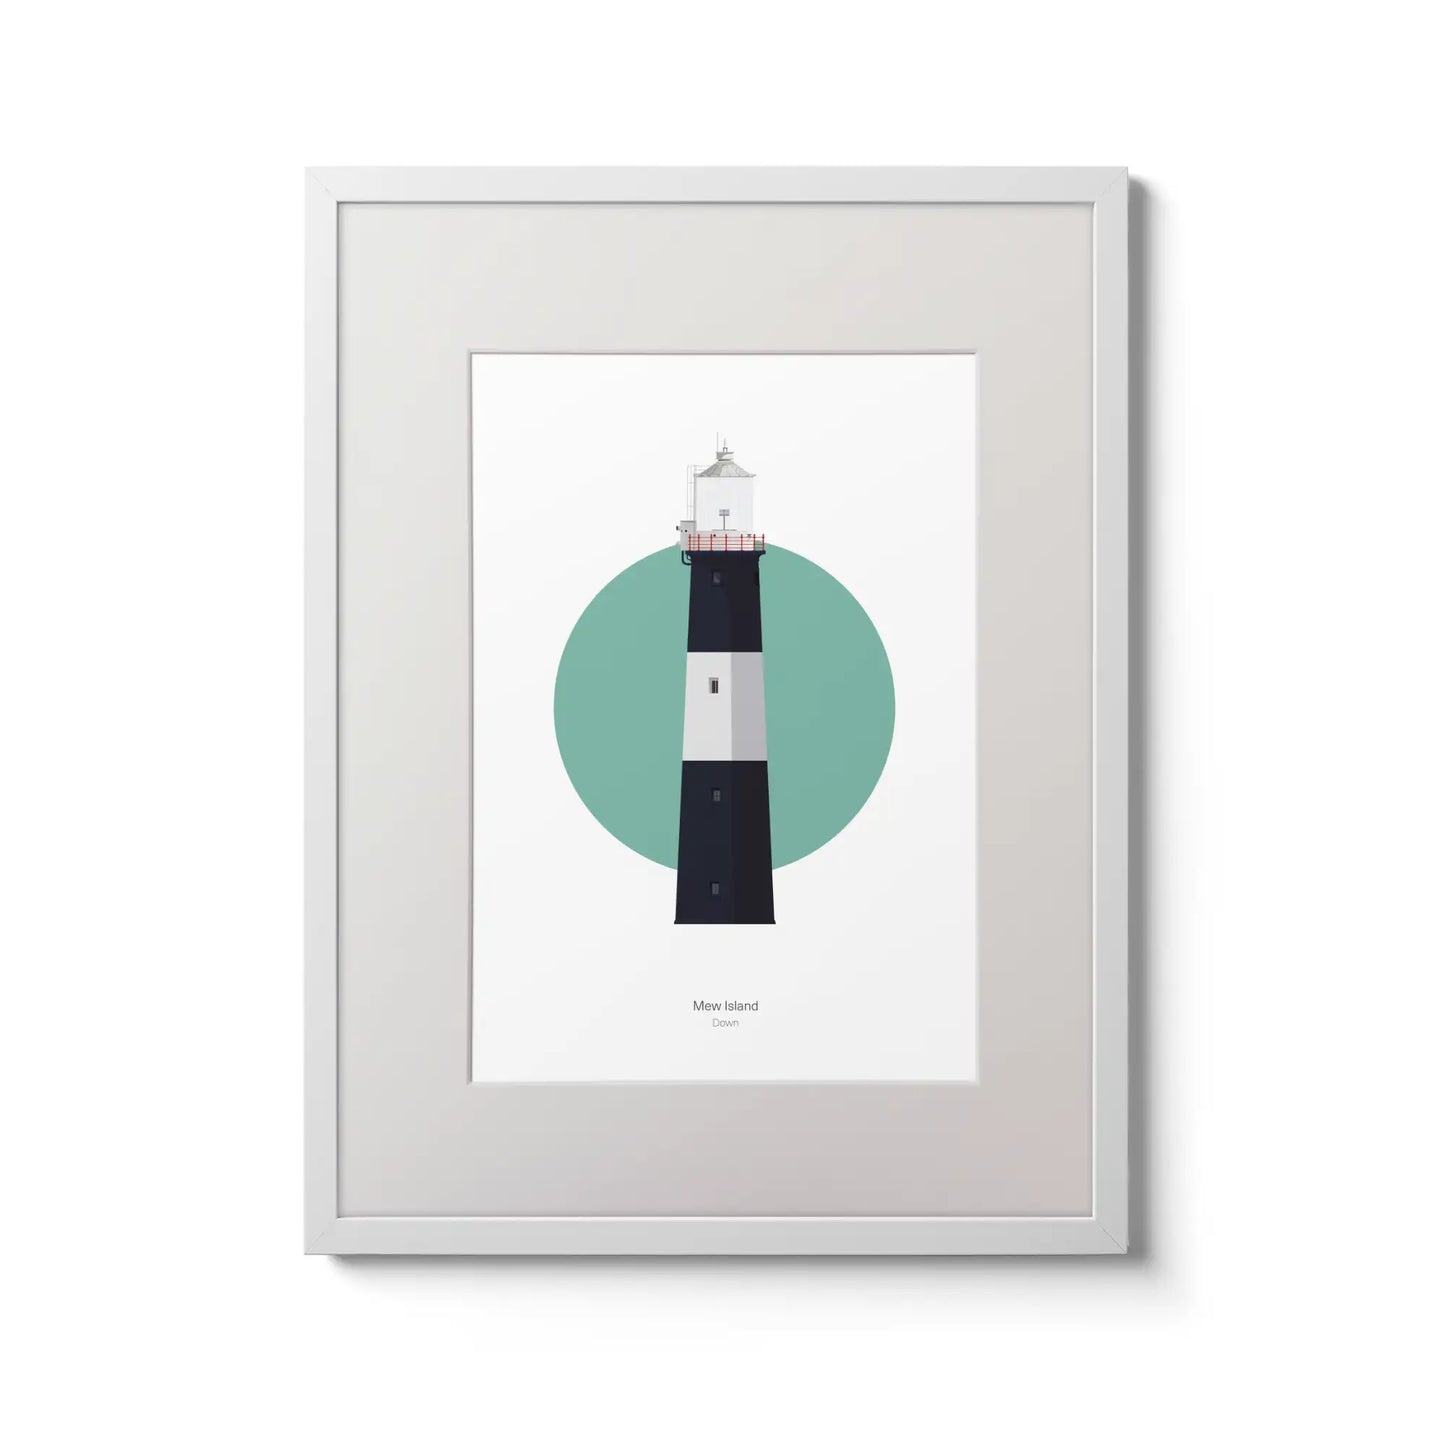 Contemporary wall art decor of Mew Island lighthouse on a white background inside light blue square,  in a white frame measuring 30x40cm.